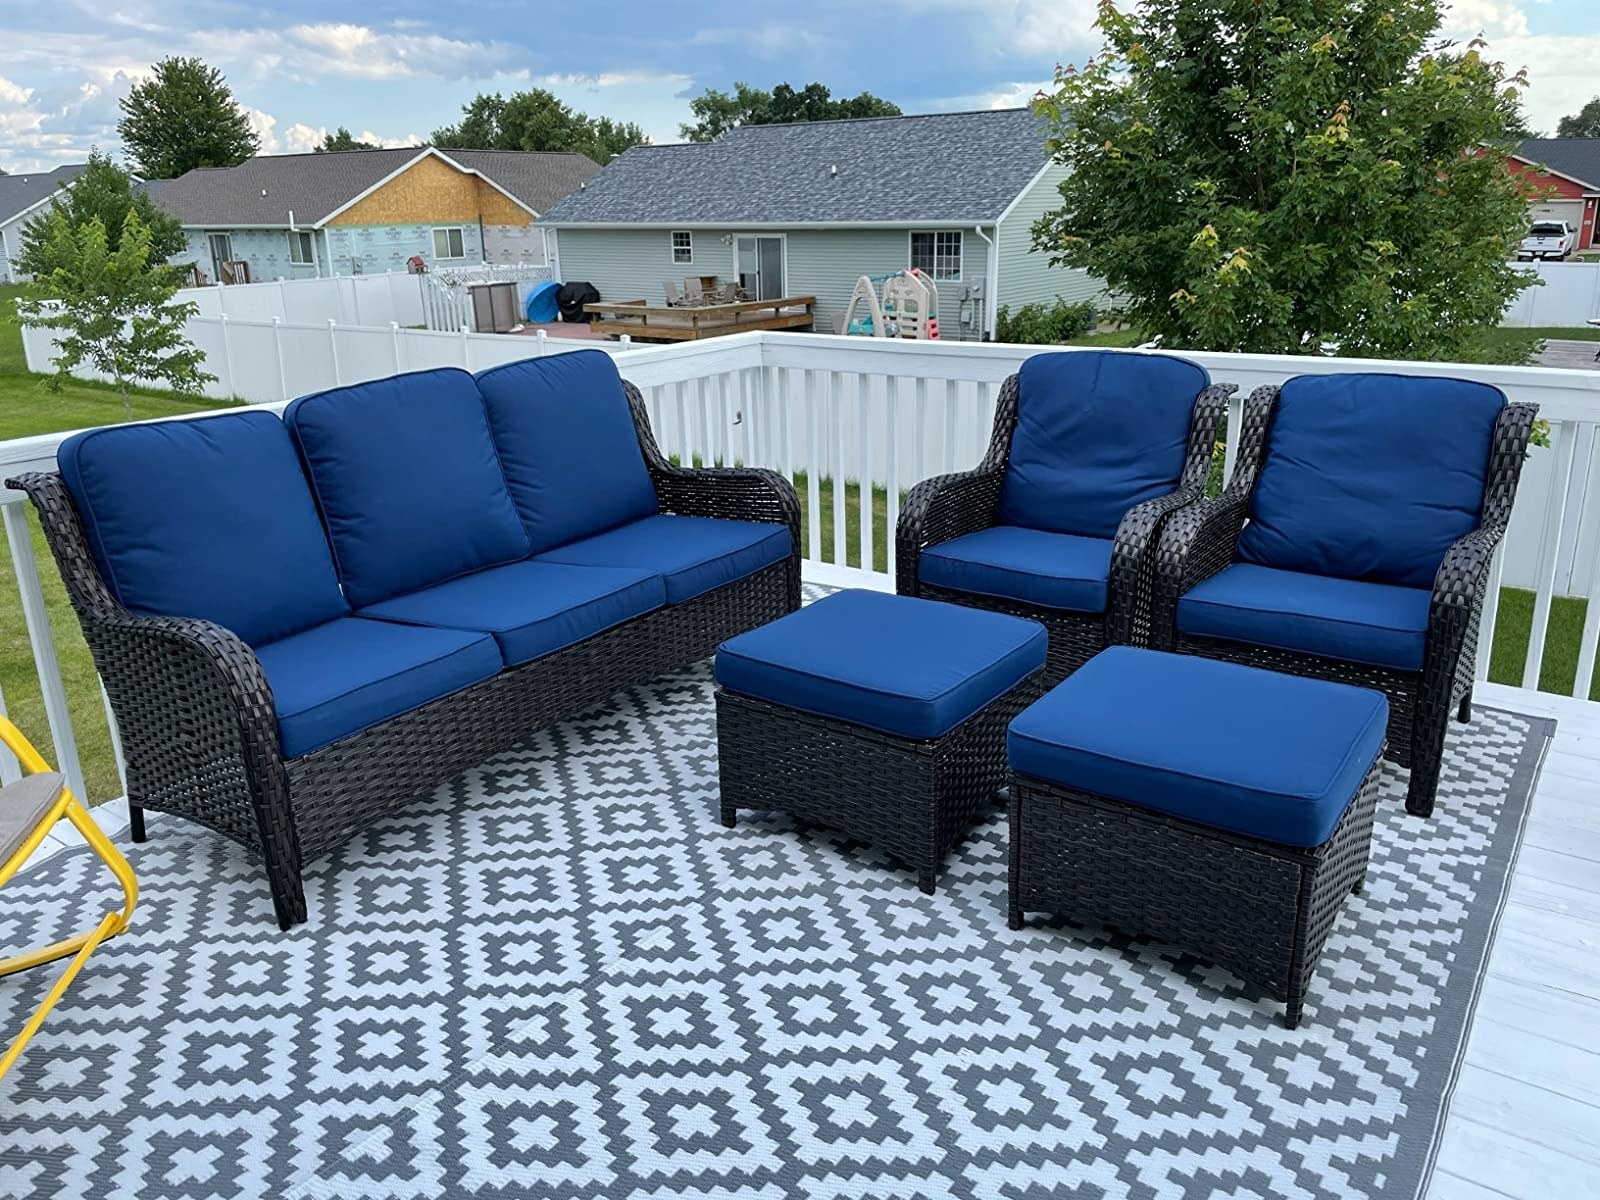 A reviewer&#x27;s phot of the five-piece patio set with blue cushions